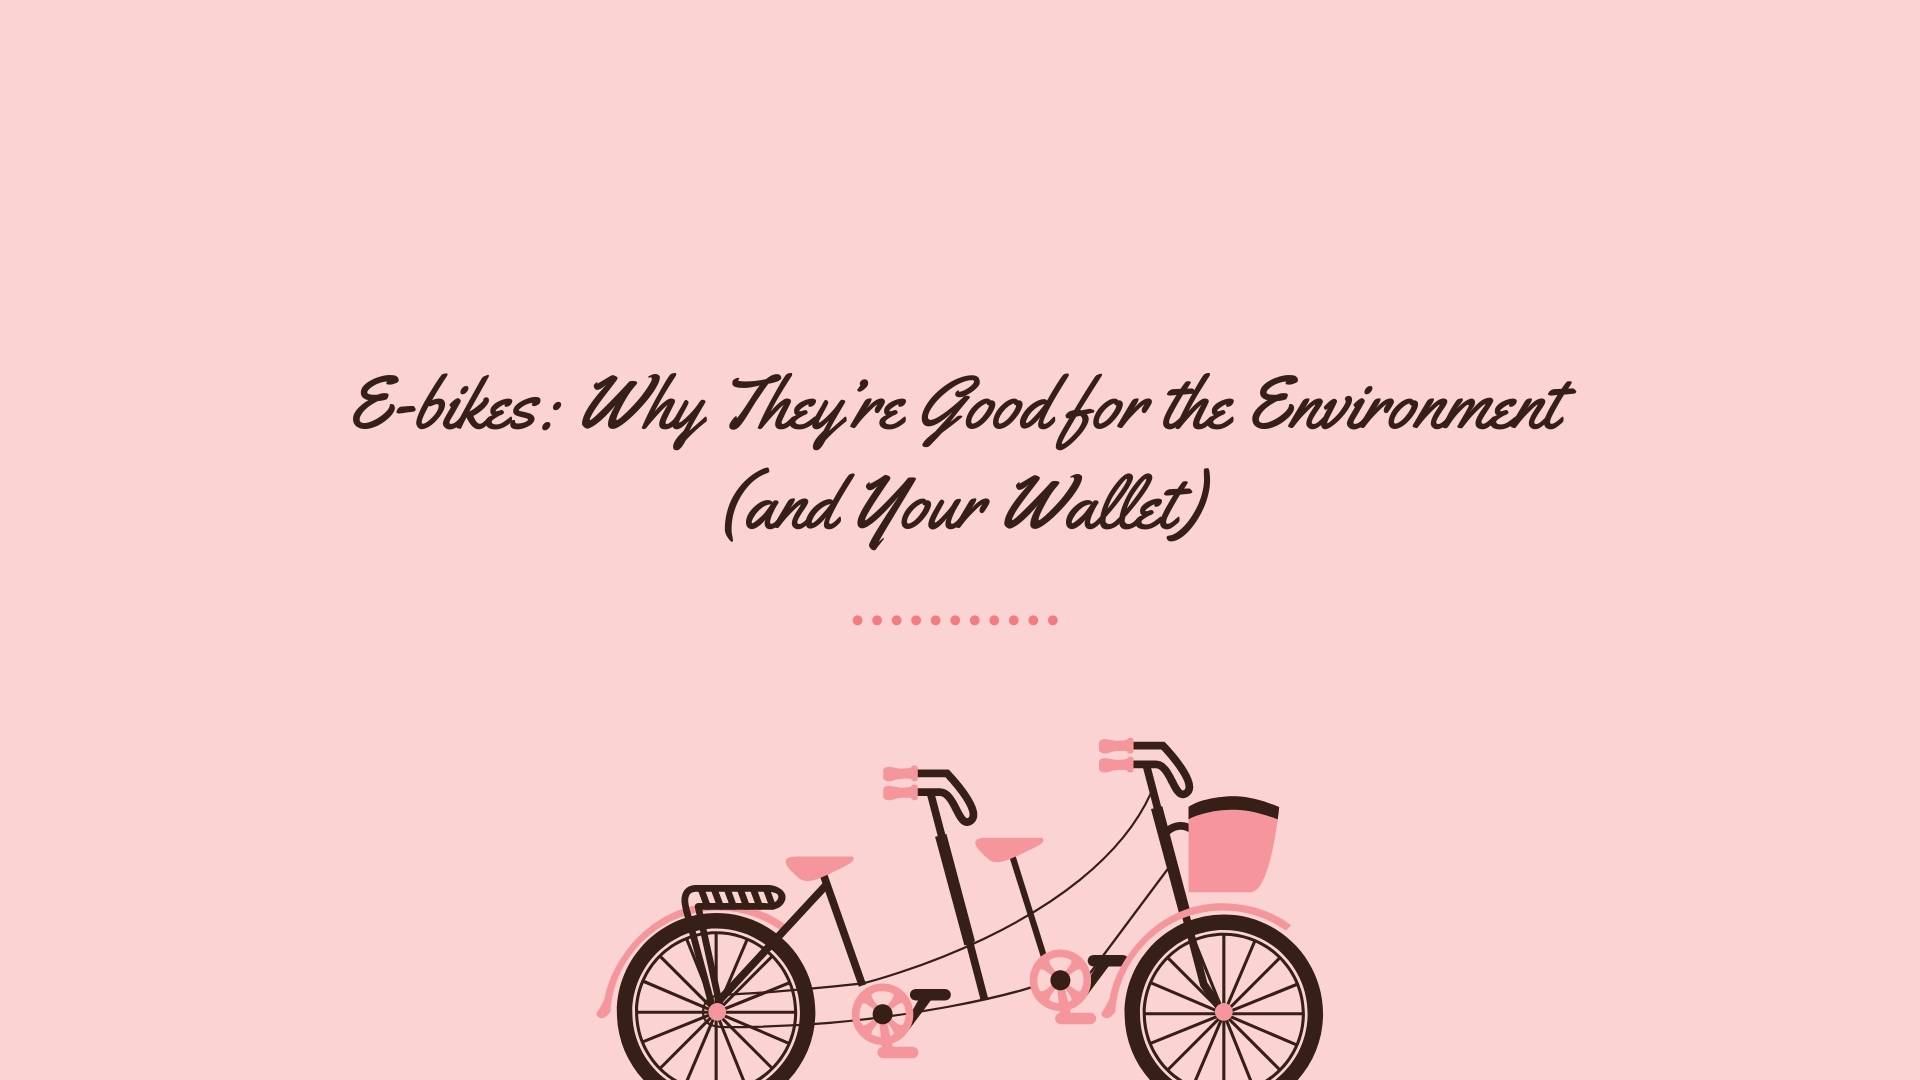 The image depicts a tandem bicycle against pink background